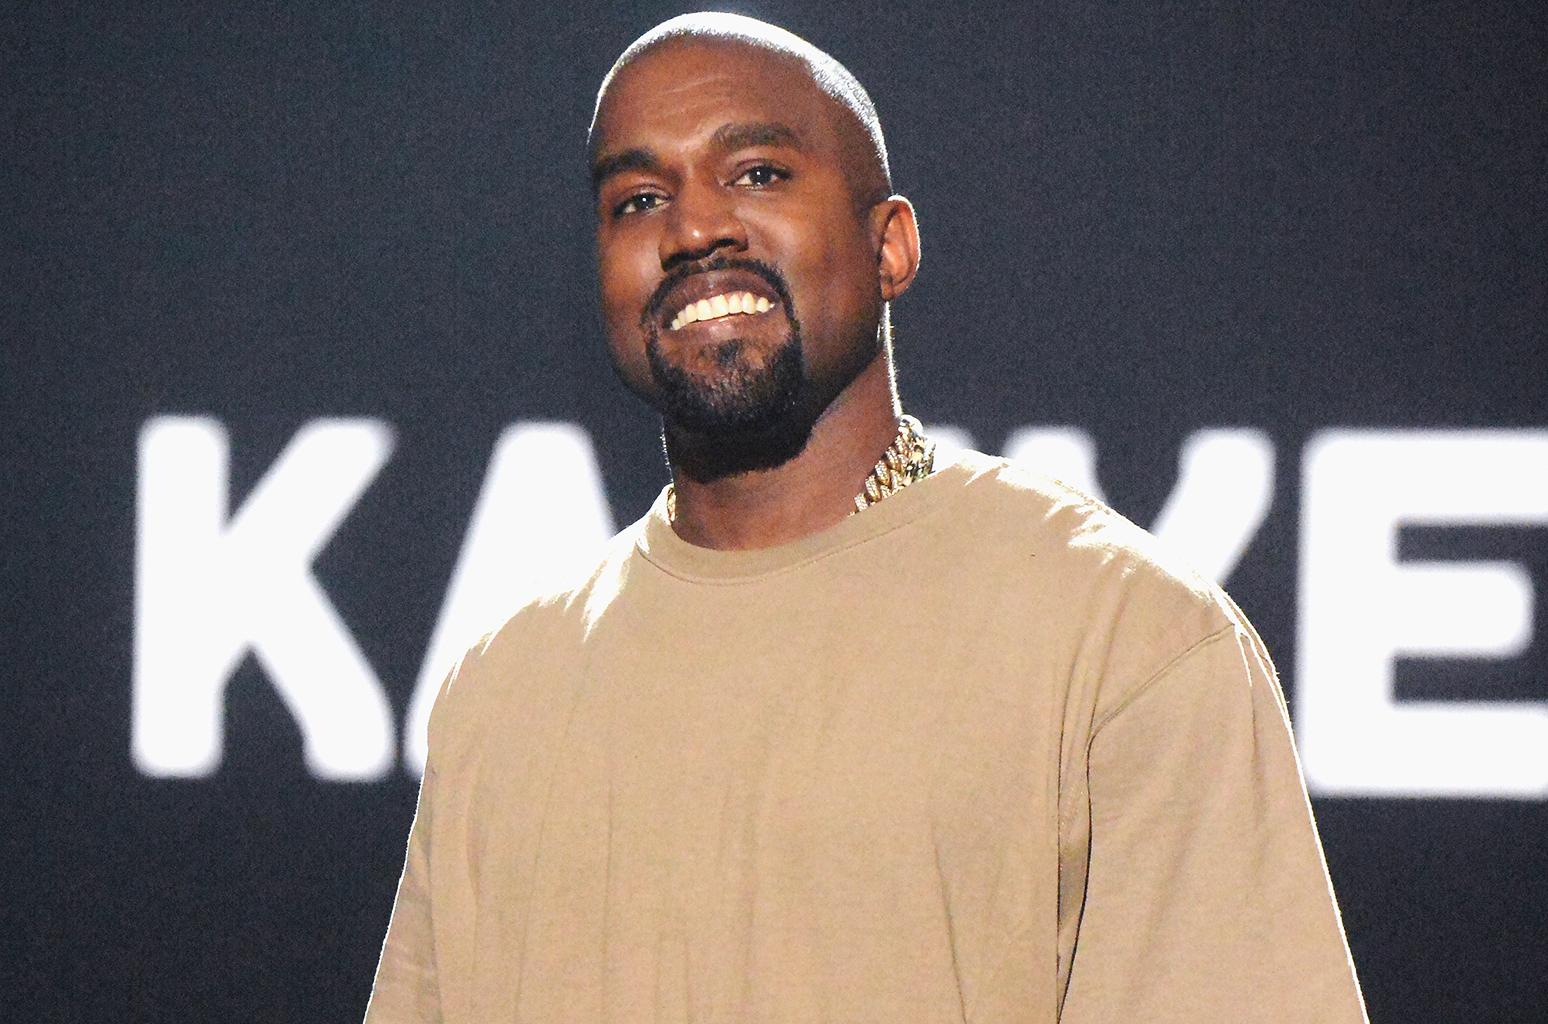 Good Deeds: Kanye West is Creating “Donda Social” to Combat Issues in Chicago [VIDEO]